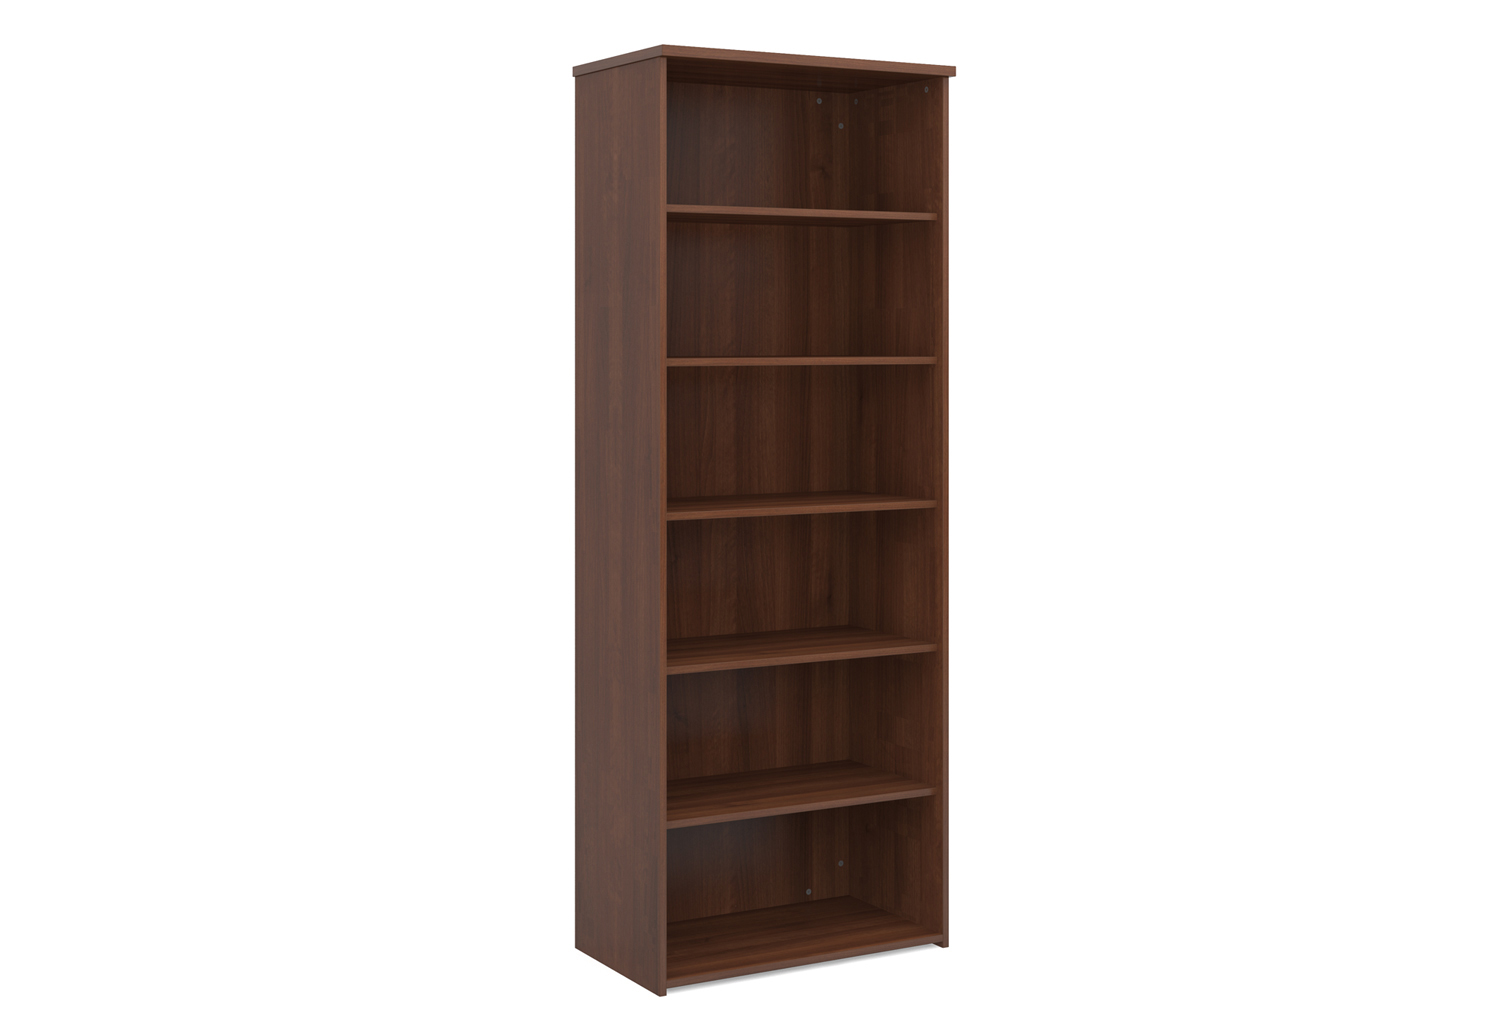 Duo Office Bookcases, 5 Shelf - 80wx47dx214h (cm), Walnut, Fully Installed